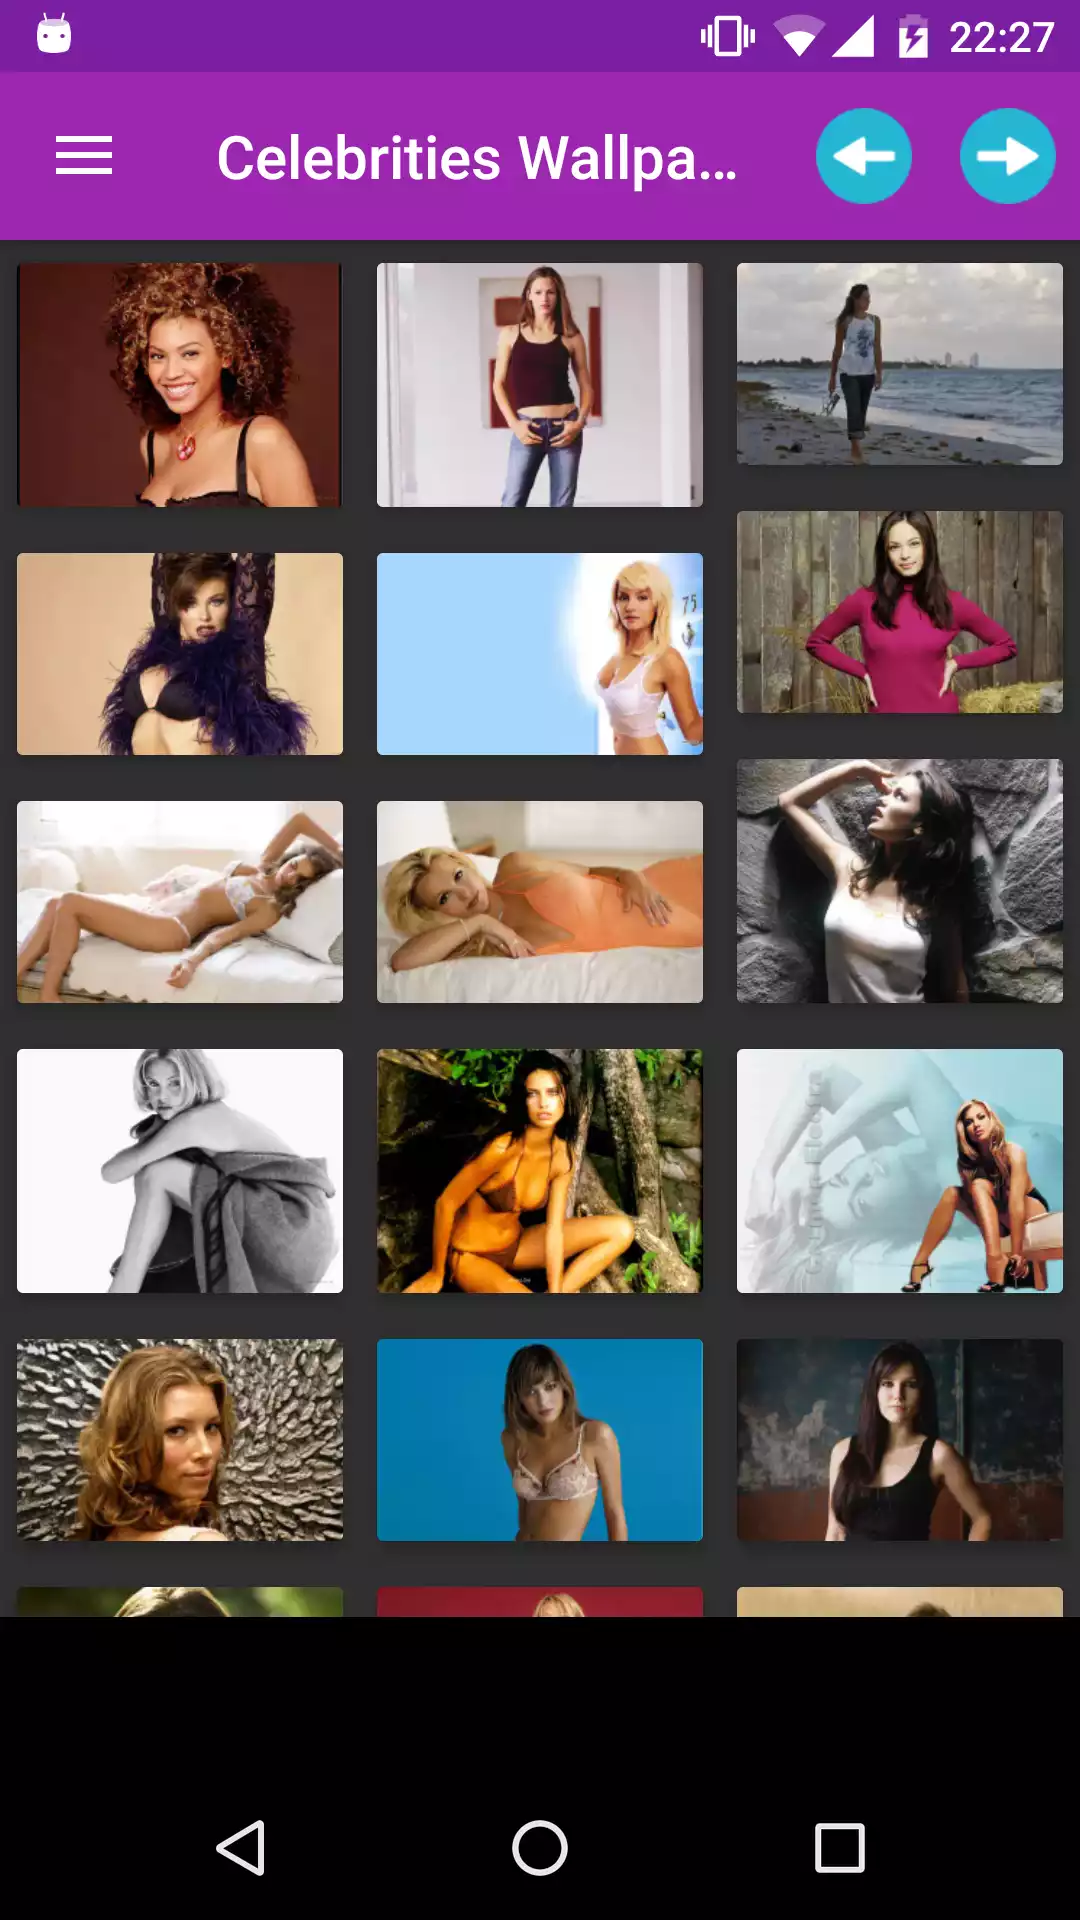 Celebrities Wallpapers application,erotic,hentsi,apps,android,pics,caprice,backgrounds,galleries,adult,titty,download,daily,lane,celebrities,hot,lily,wallpapers,apk,sexy,hentai,pic,pictures